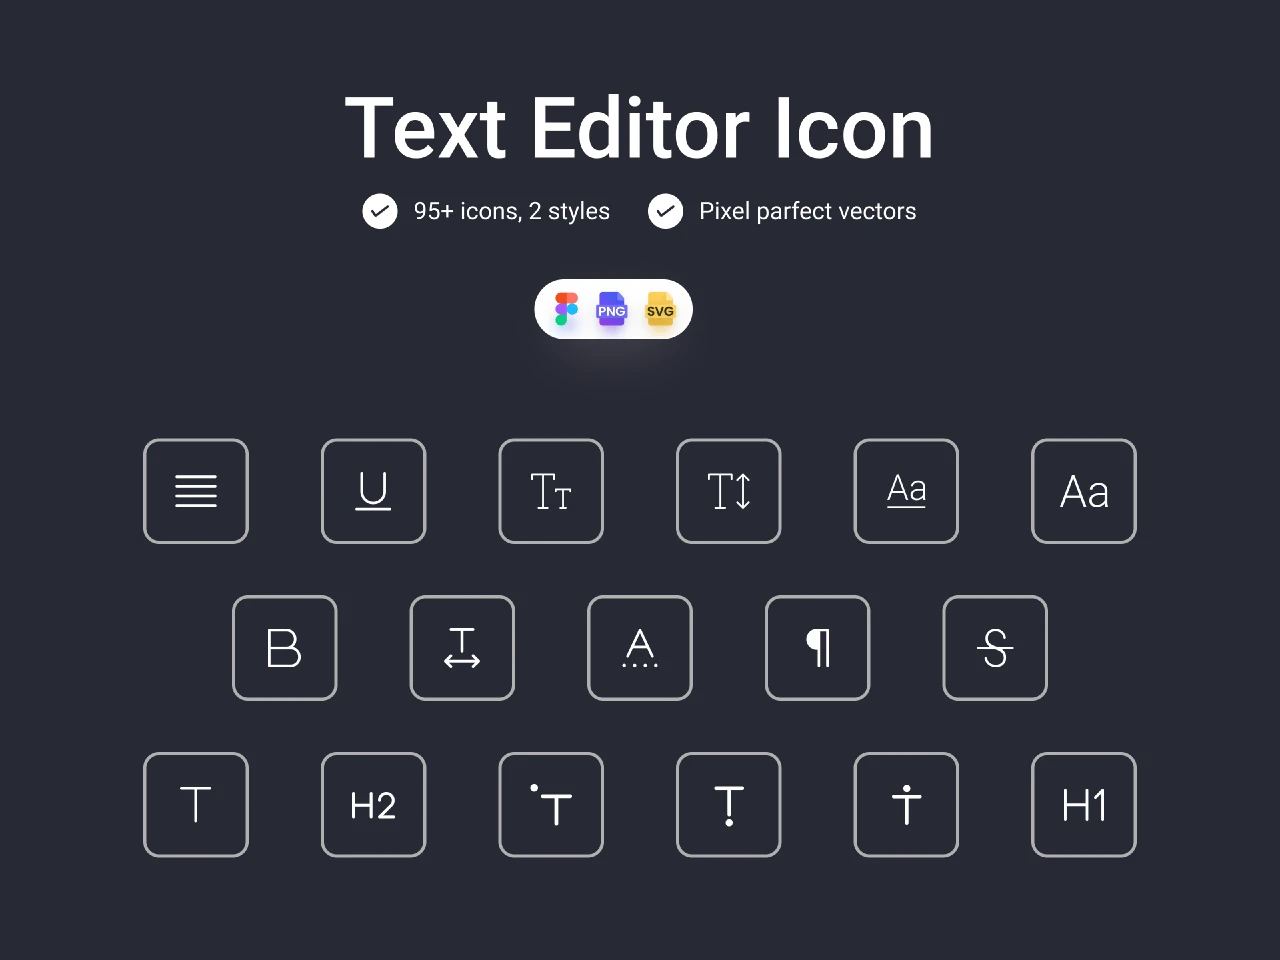 Text Editor Icon for Figma and Adobe XD